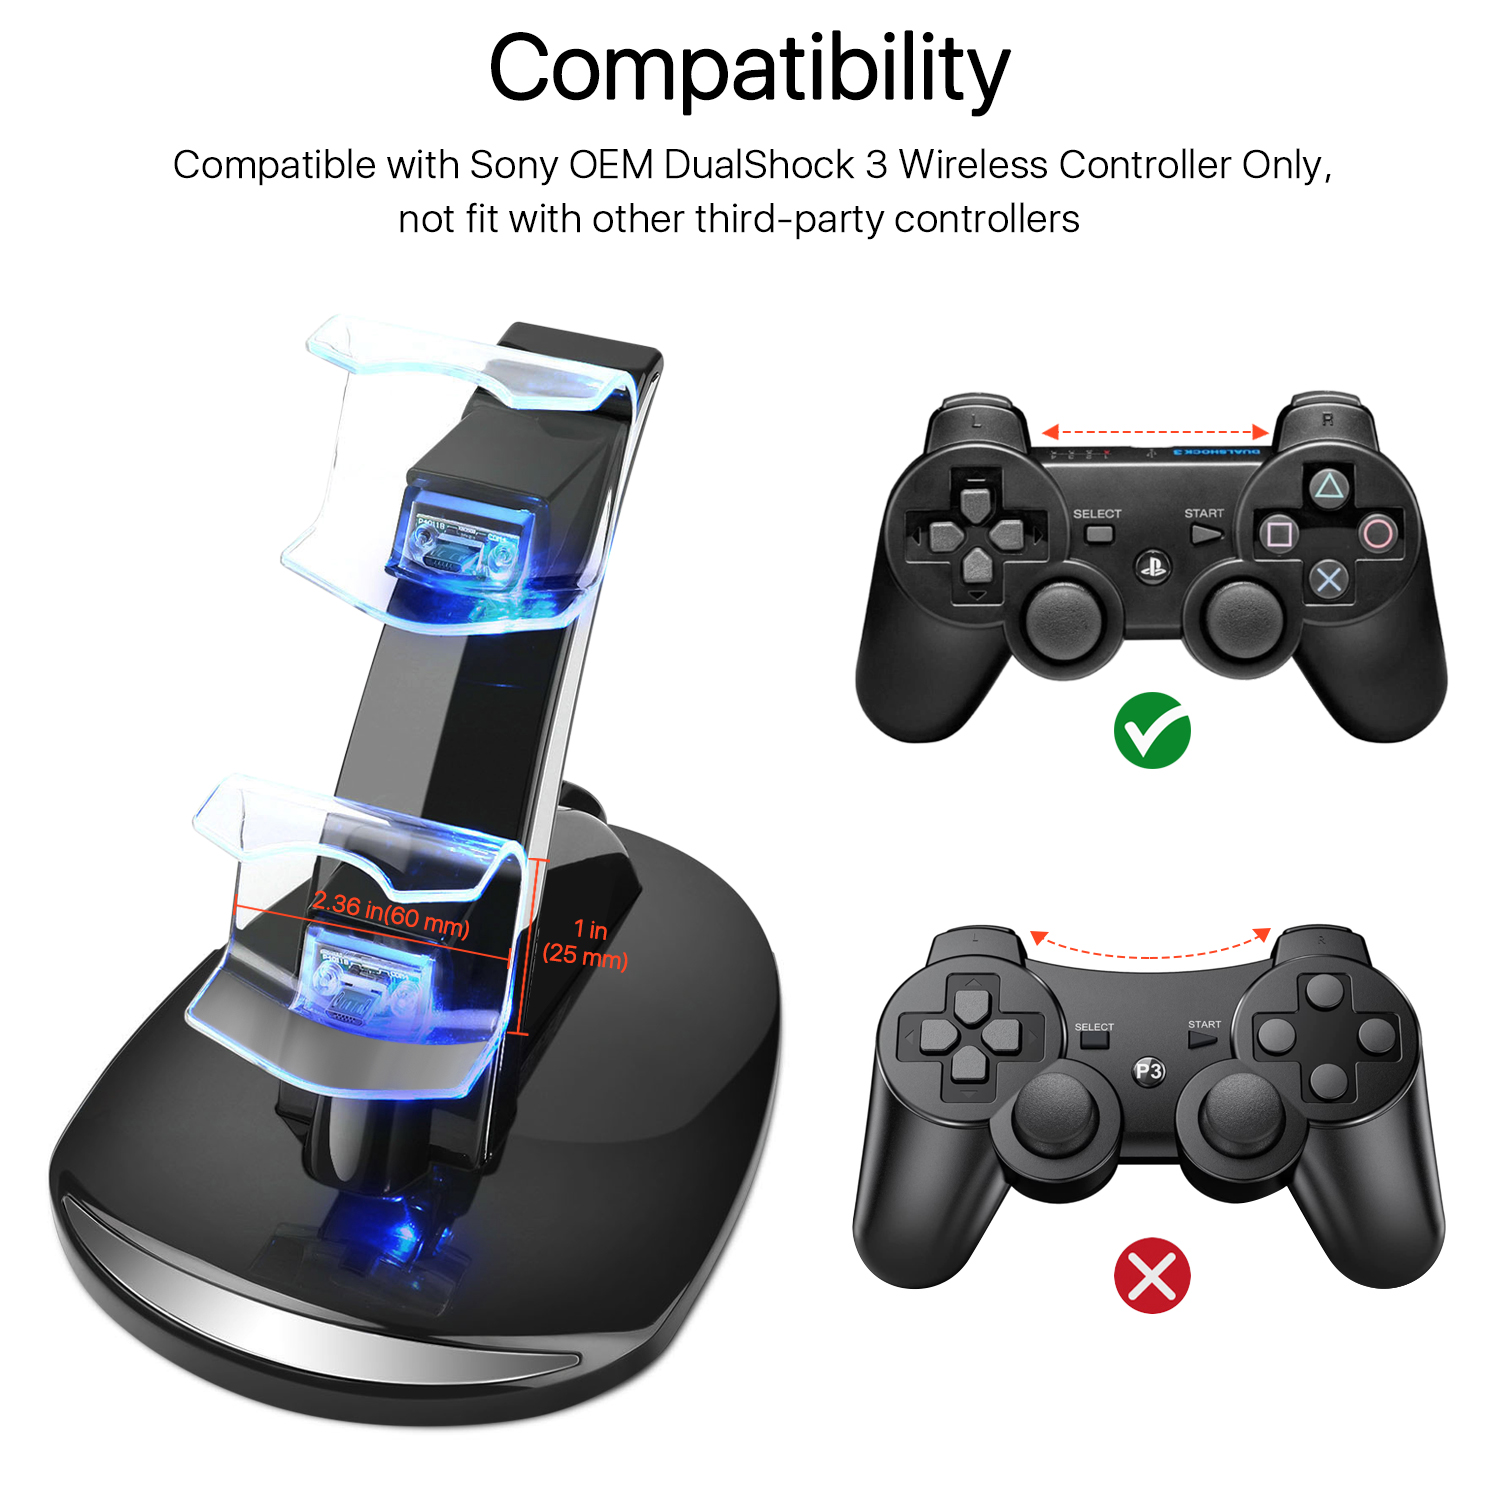 Fast Charging Up To 4 PS3 Controller - Sleek tower dock station design allows 2 Playstation 3 Dualshock 3 Controllers to be neatly organized and charge, 2 more USB ports on the side for ps3 controller charger cable to simutanously charge 4 total controllers at a time